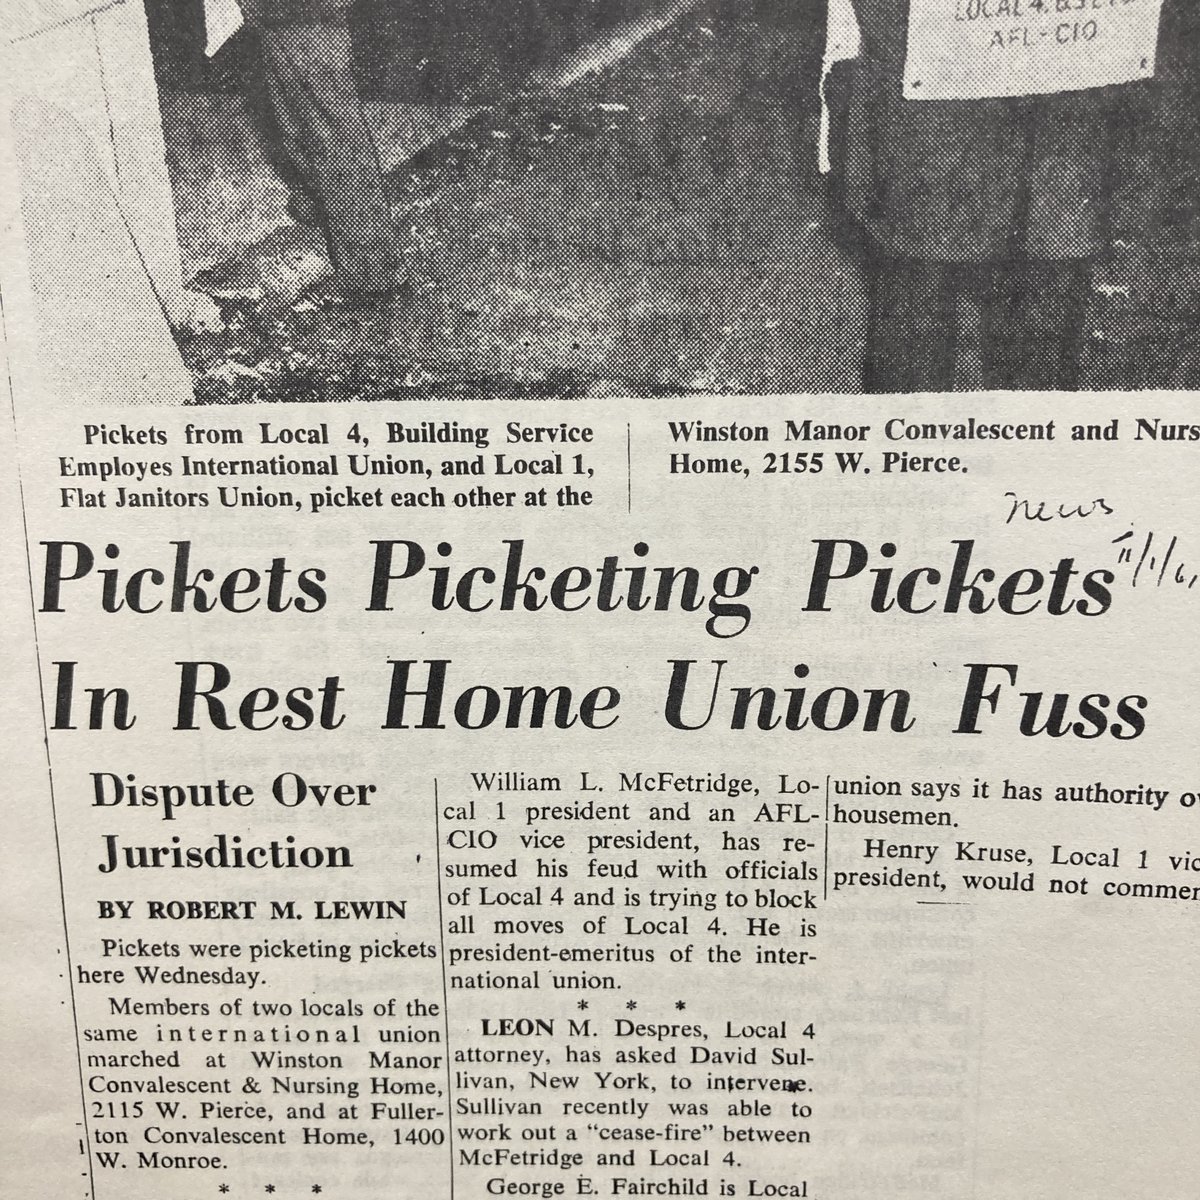 Get your pickets, it's pickets picketing pickets spring! Three different reporters all had the same great idea when covering this argument between Local 1 and Local 4 in 1961. 📸: SEIU International Vice-President Records here at the @ReutherLibrary